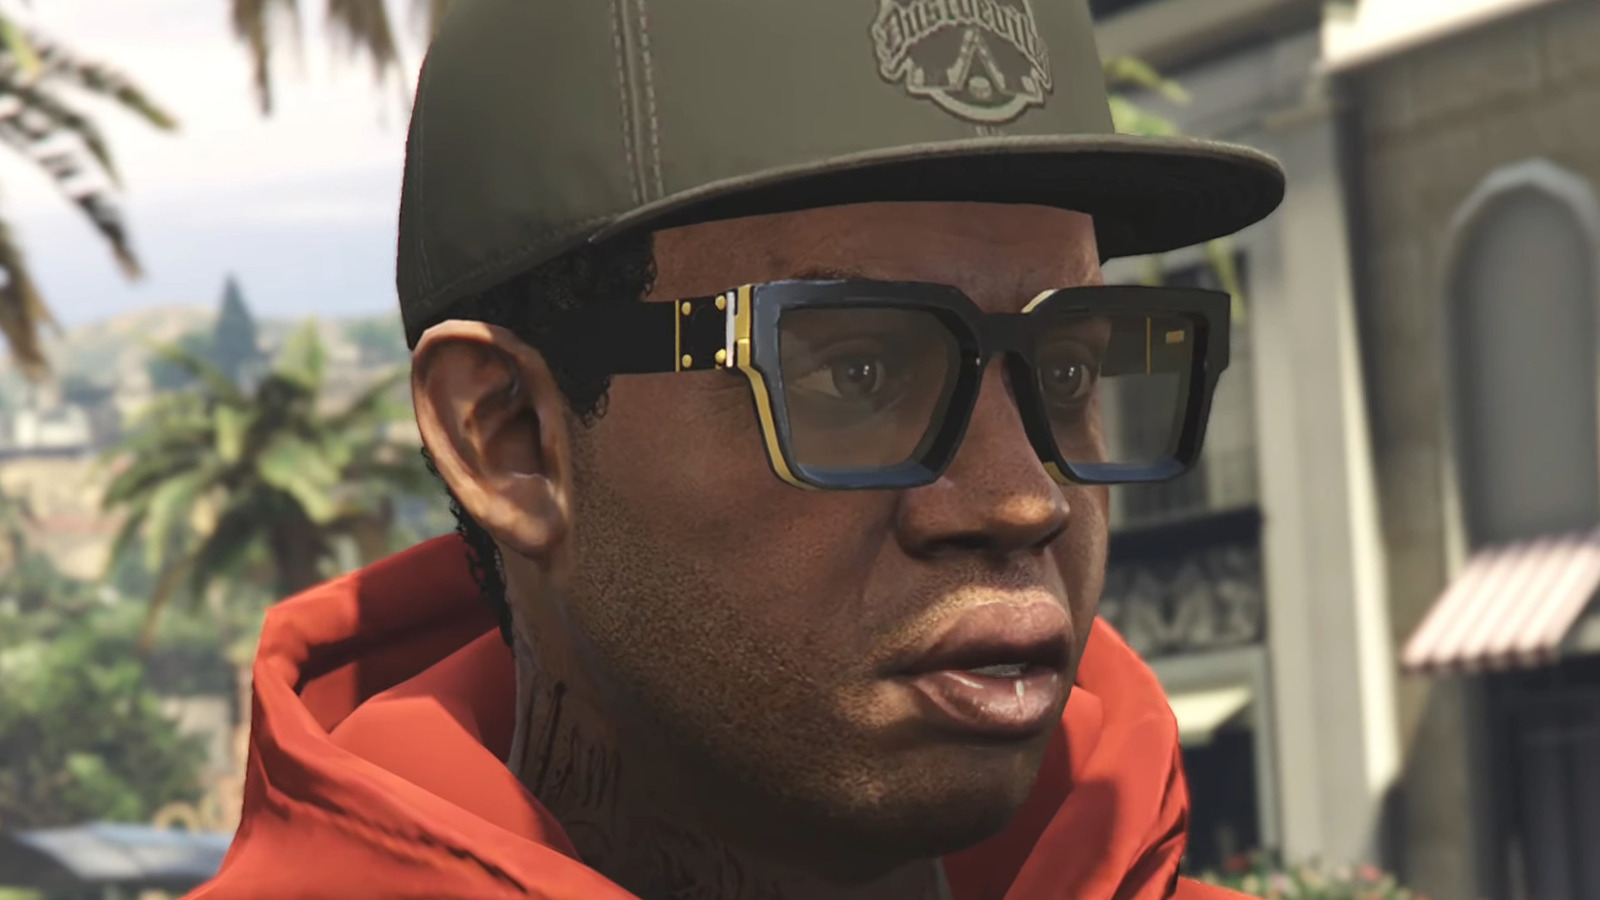 5 reasons why GTA Online players want crossplay